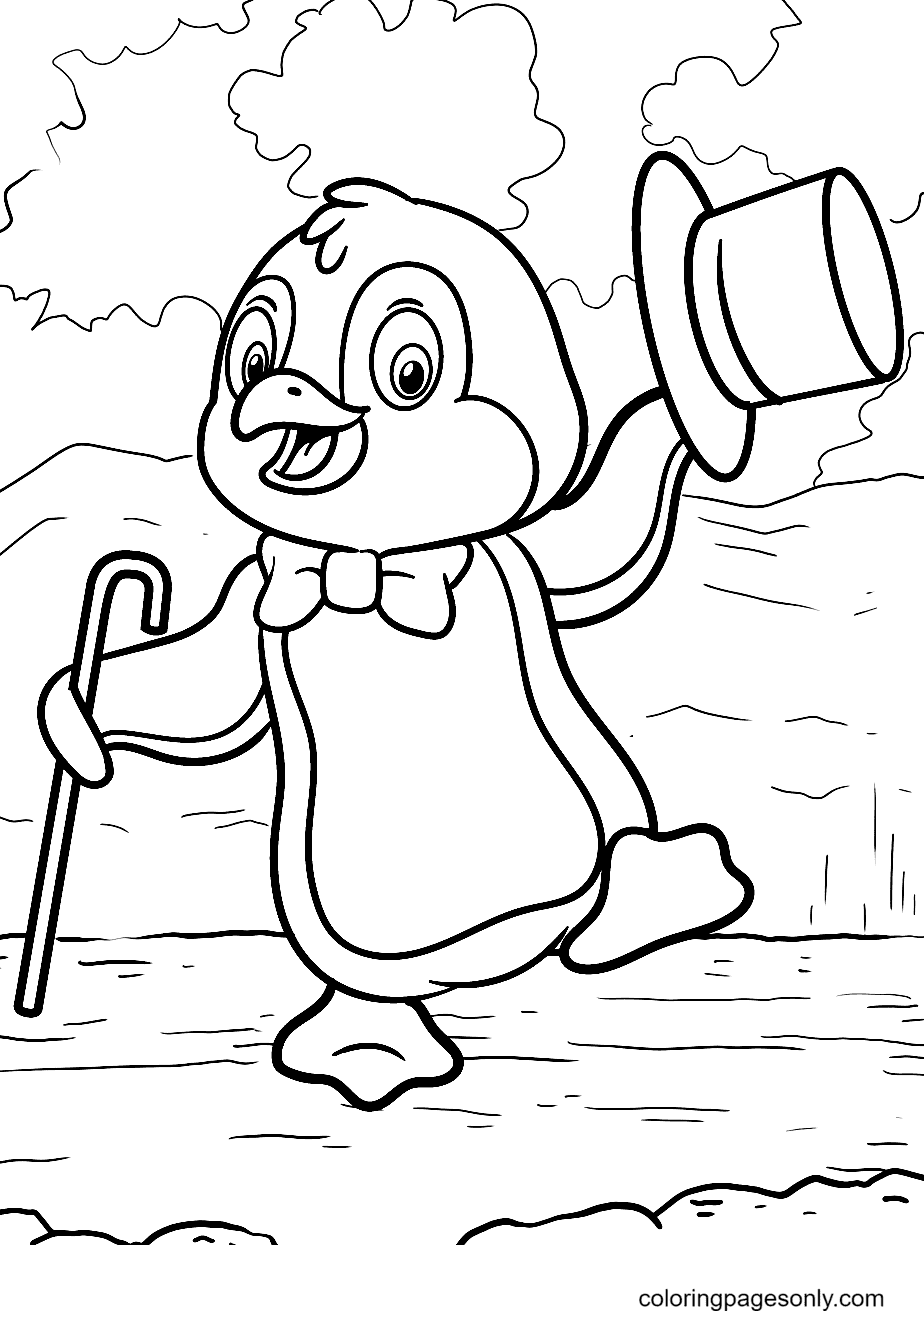 A Cute Dancing Penguin Coloring Page